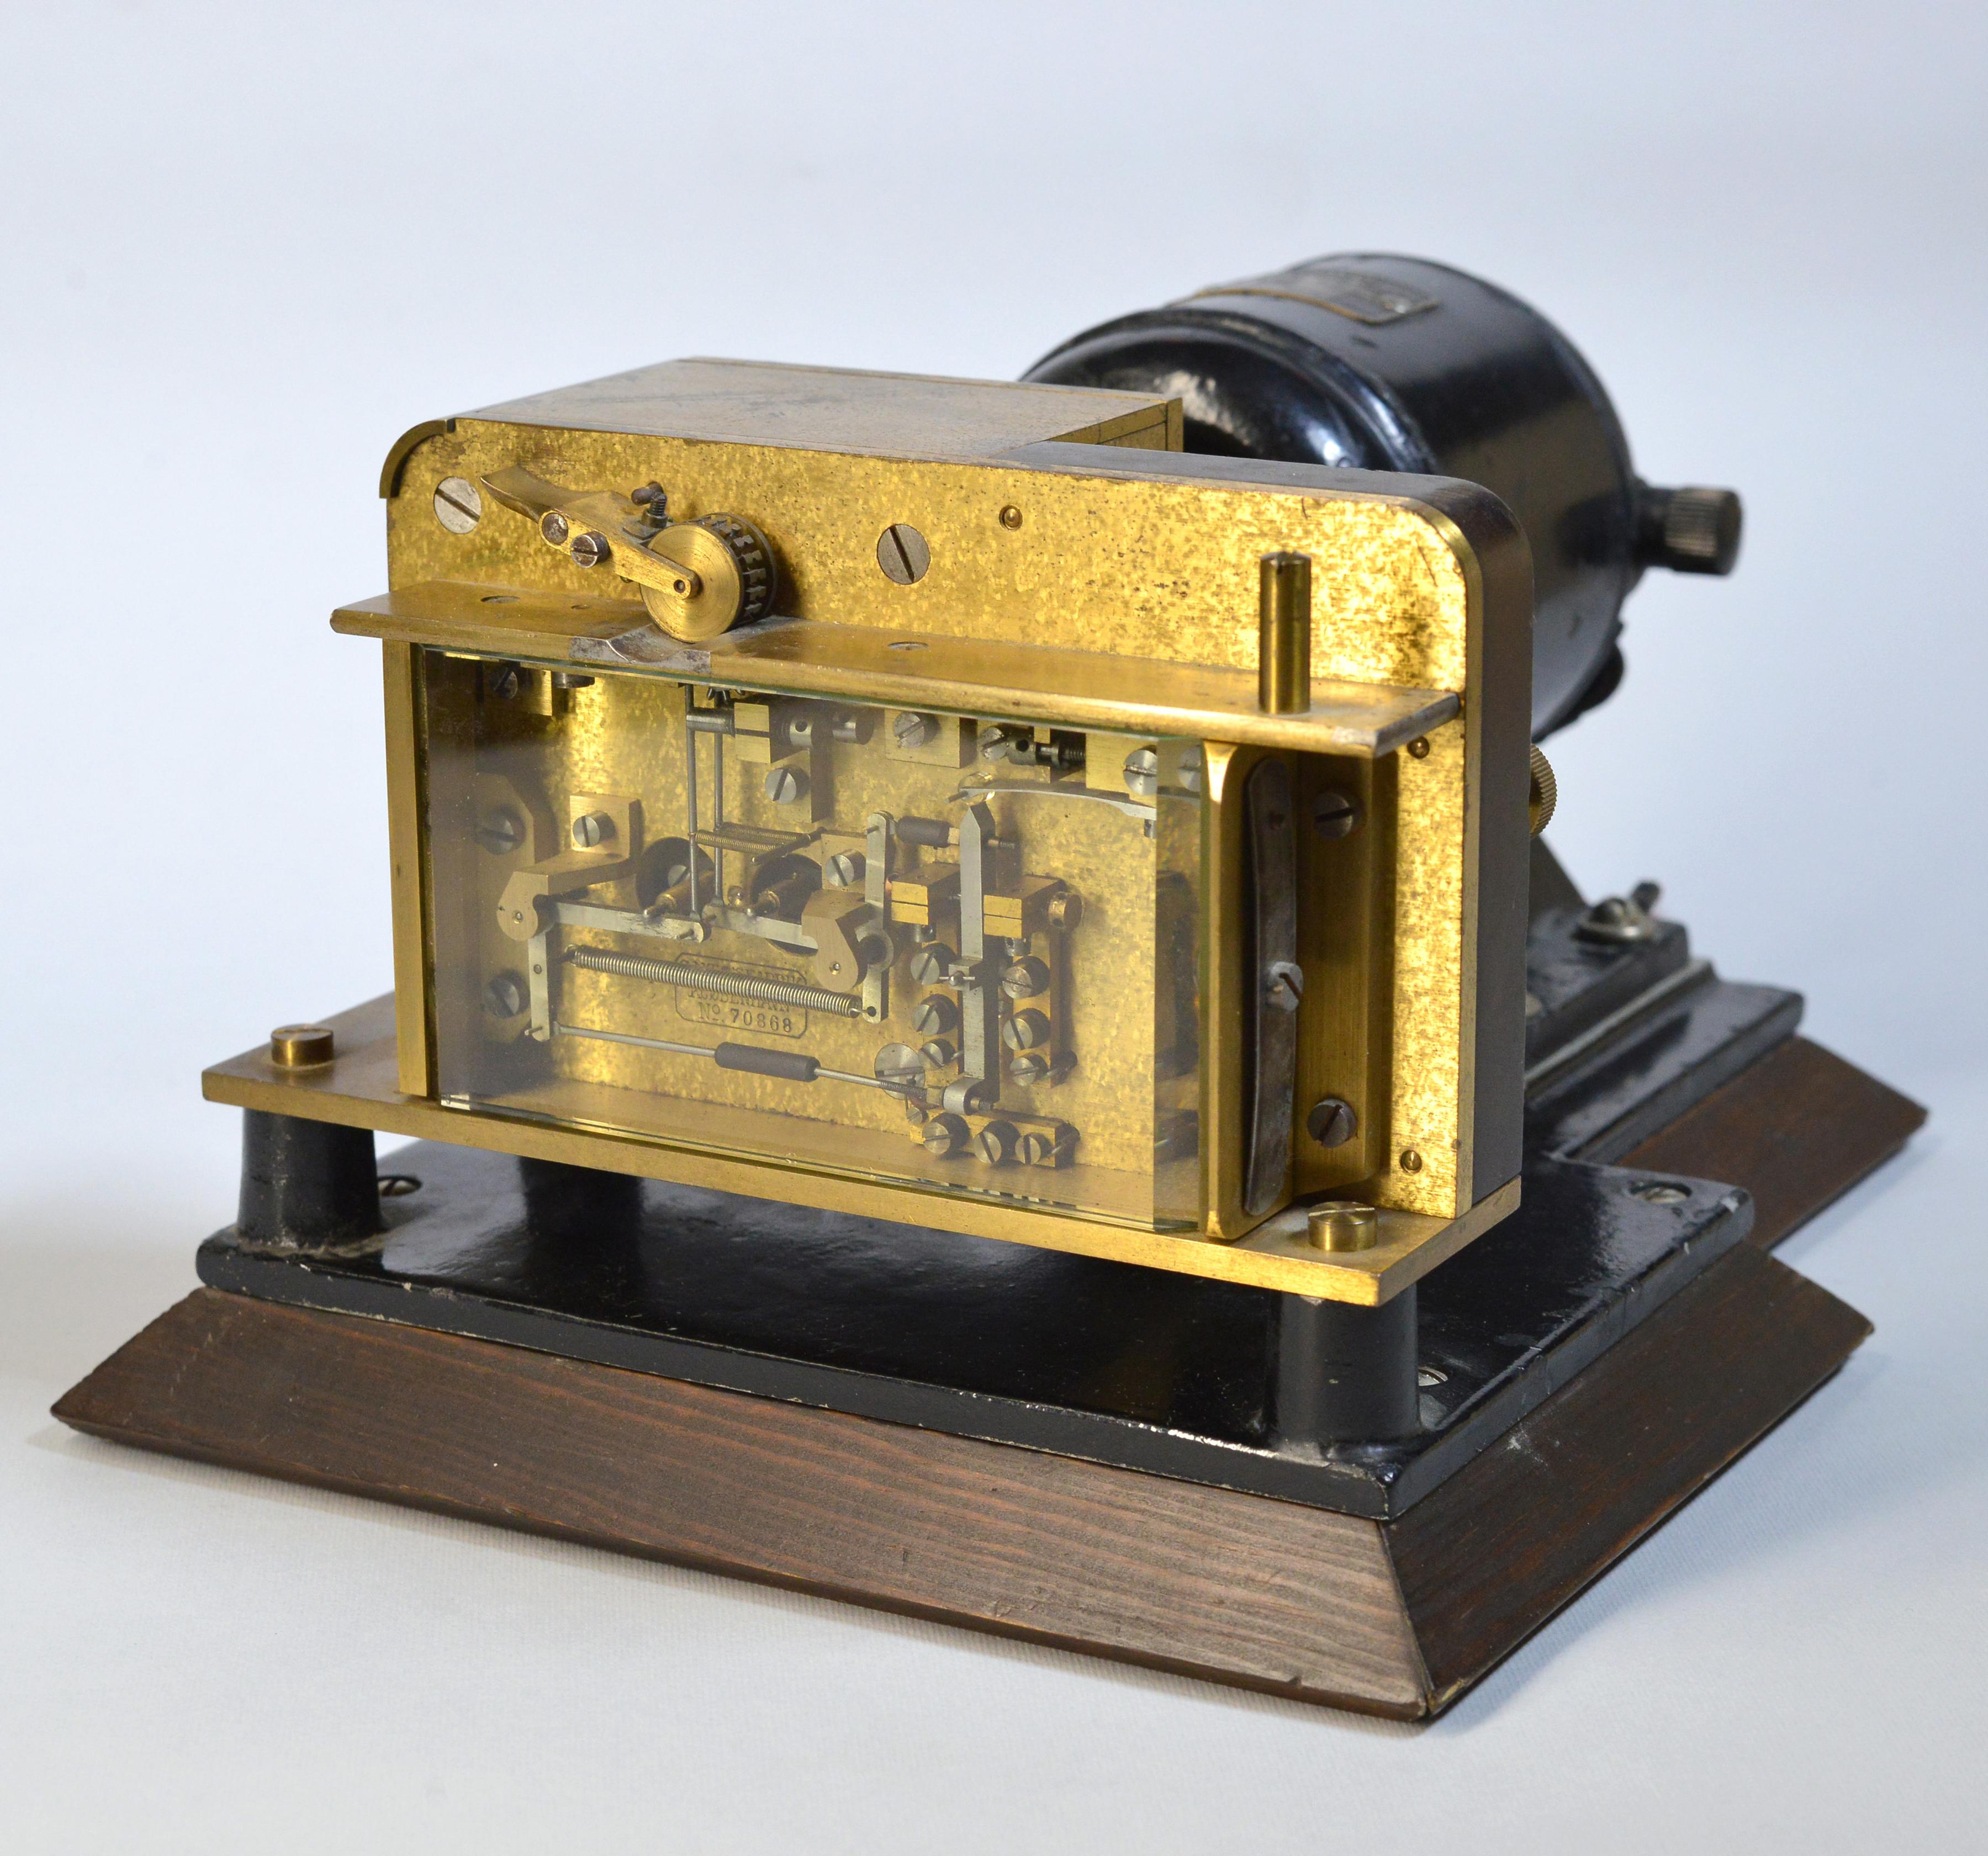 The telegraph apparatus made in early 20th century and equipped with electric motor (Københavns Elektromotor Fabrik) perhaps later ca 1925.
The brass and steel instrument is state of the art creation by legendary Danish engineers. Very good, minimal